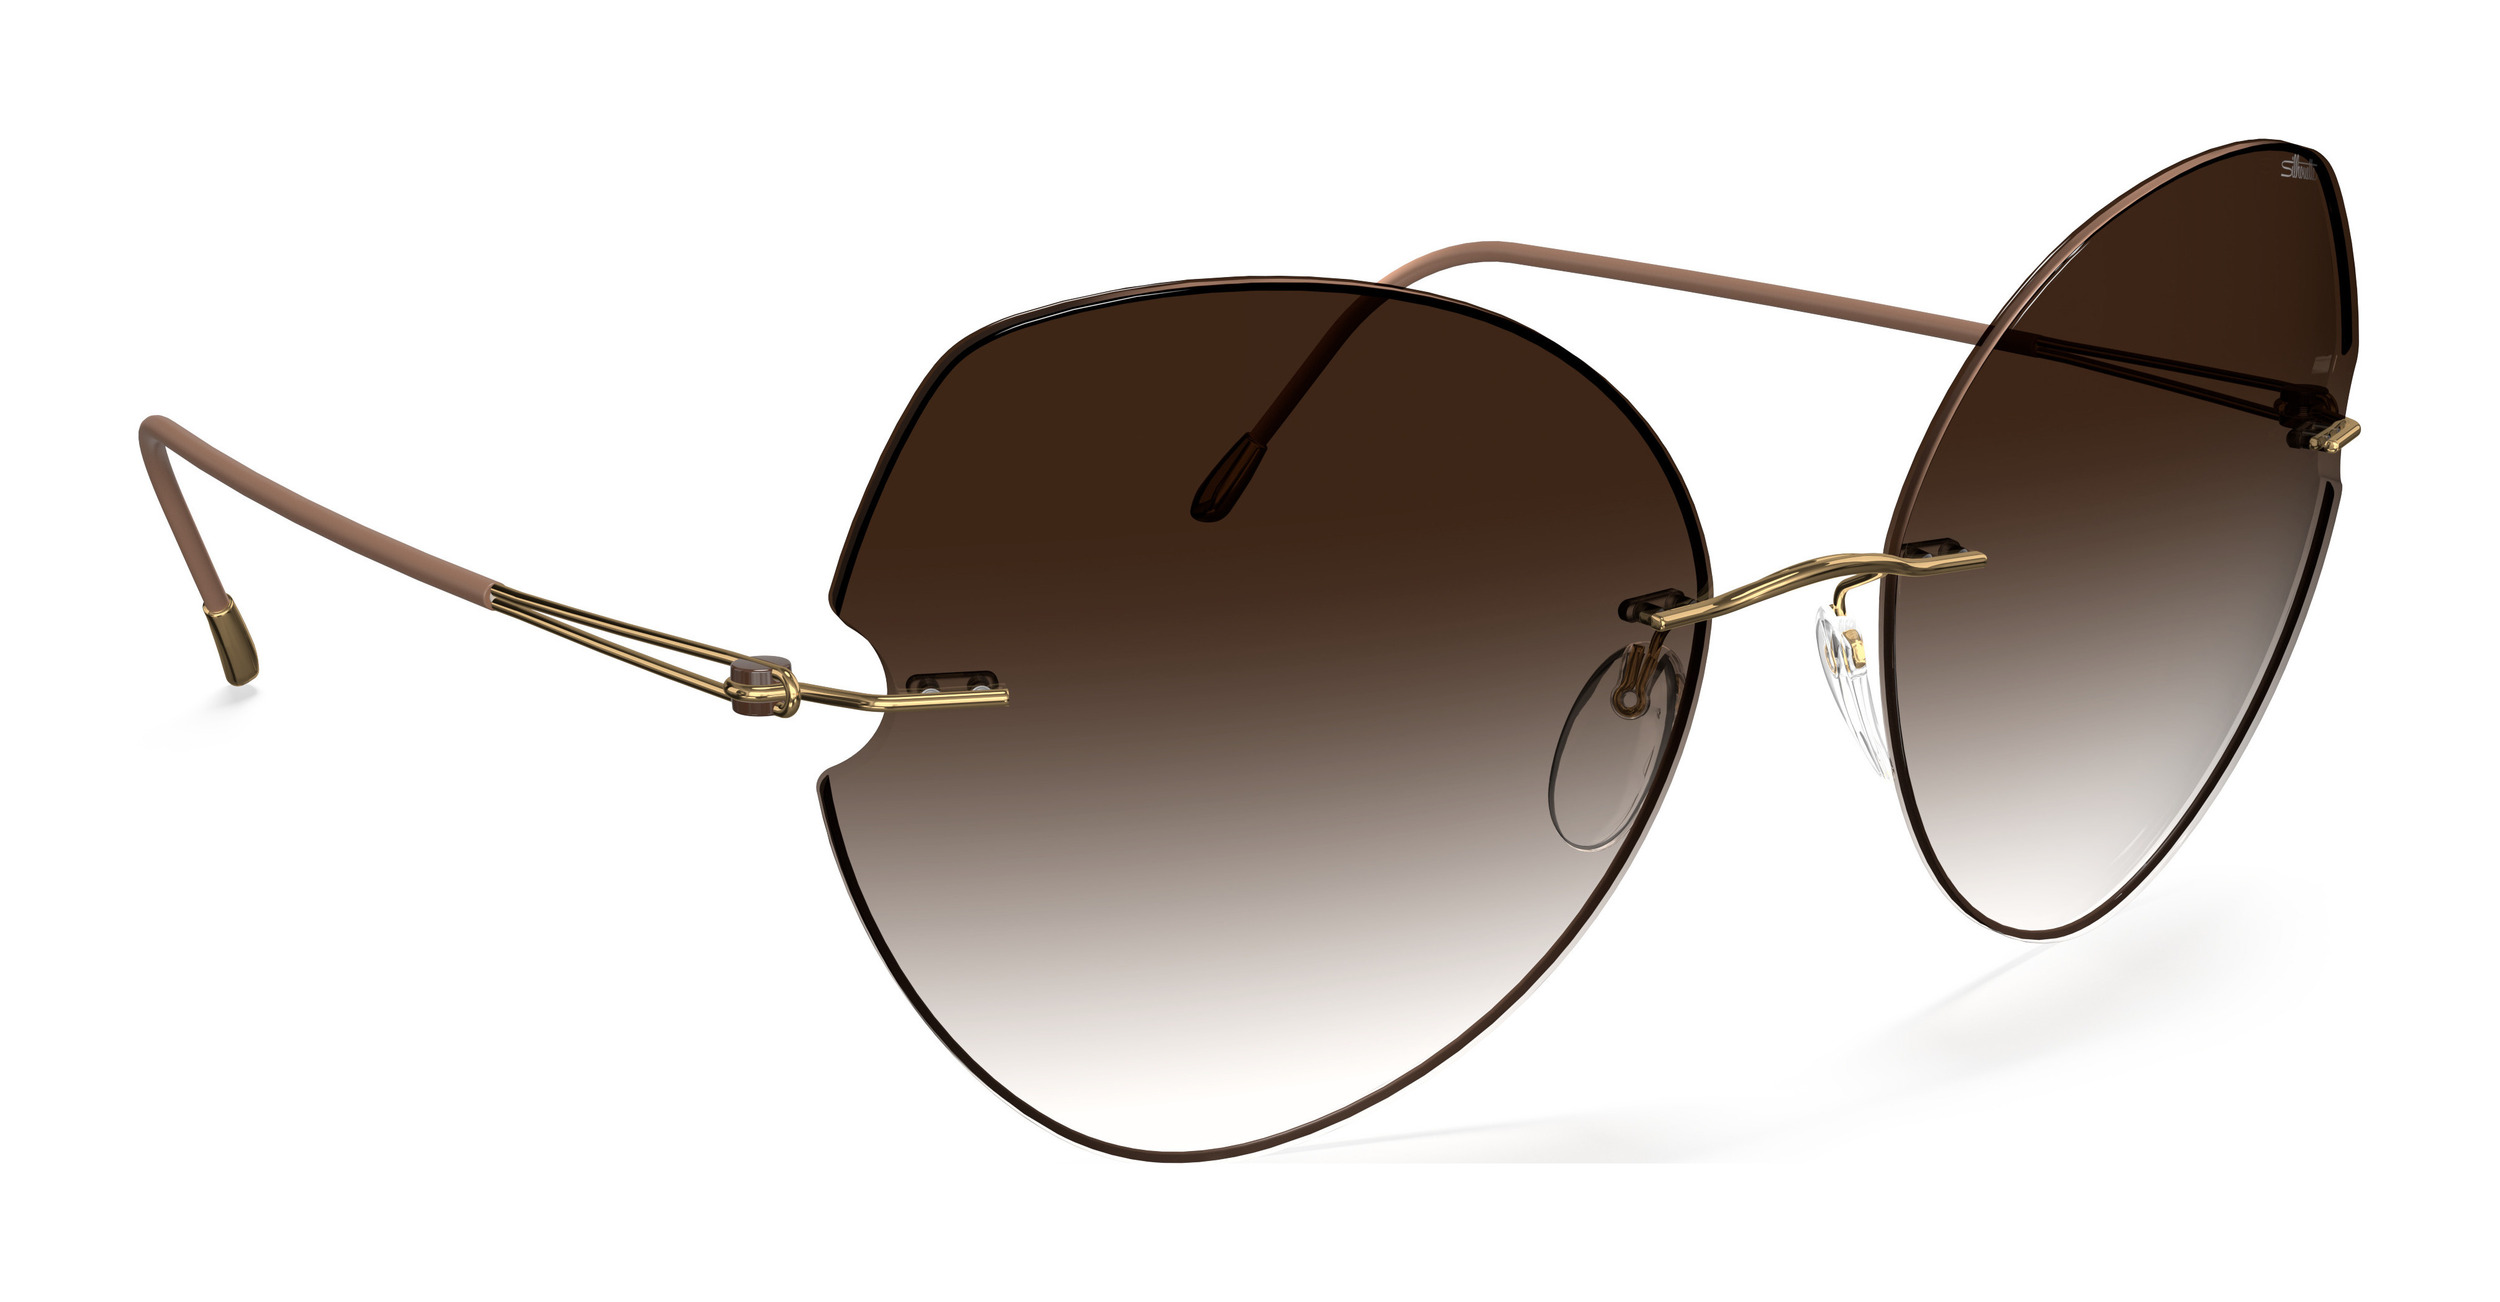 silhouette_fisher_island_8182_rimless_shades_classic_brown_gradient